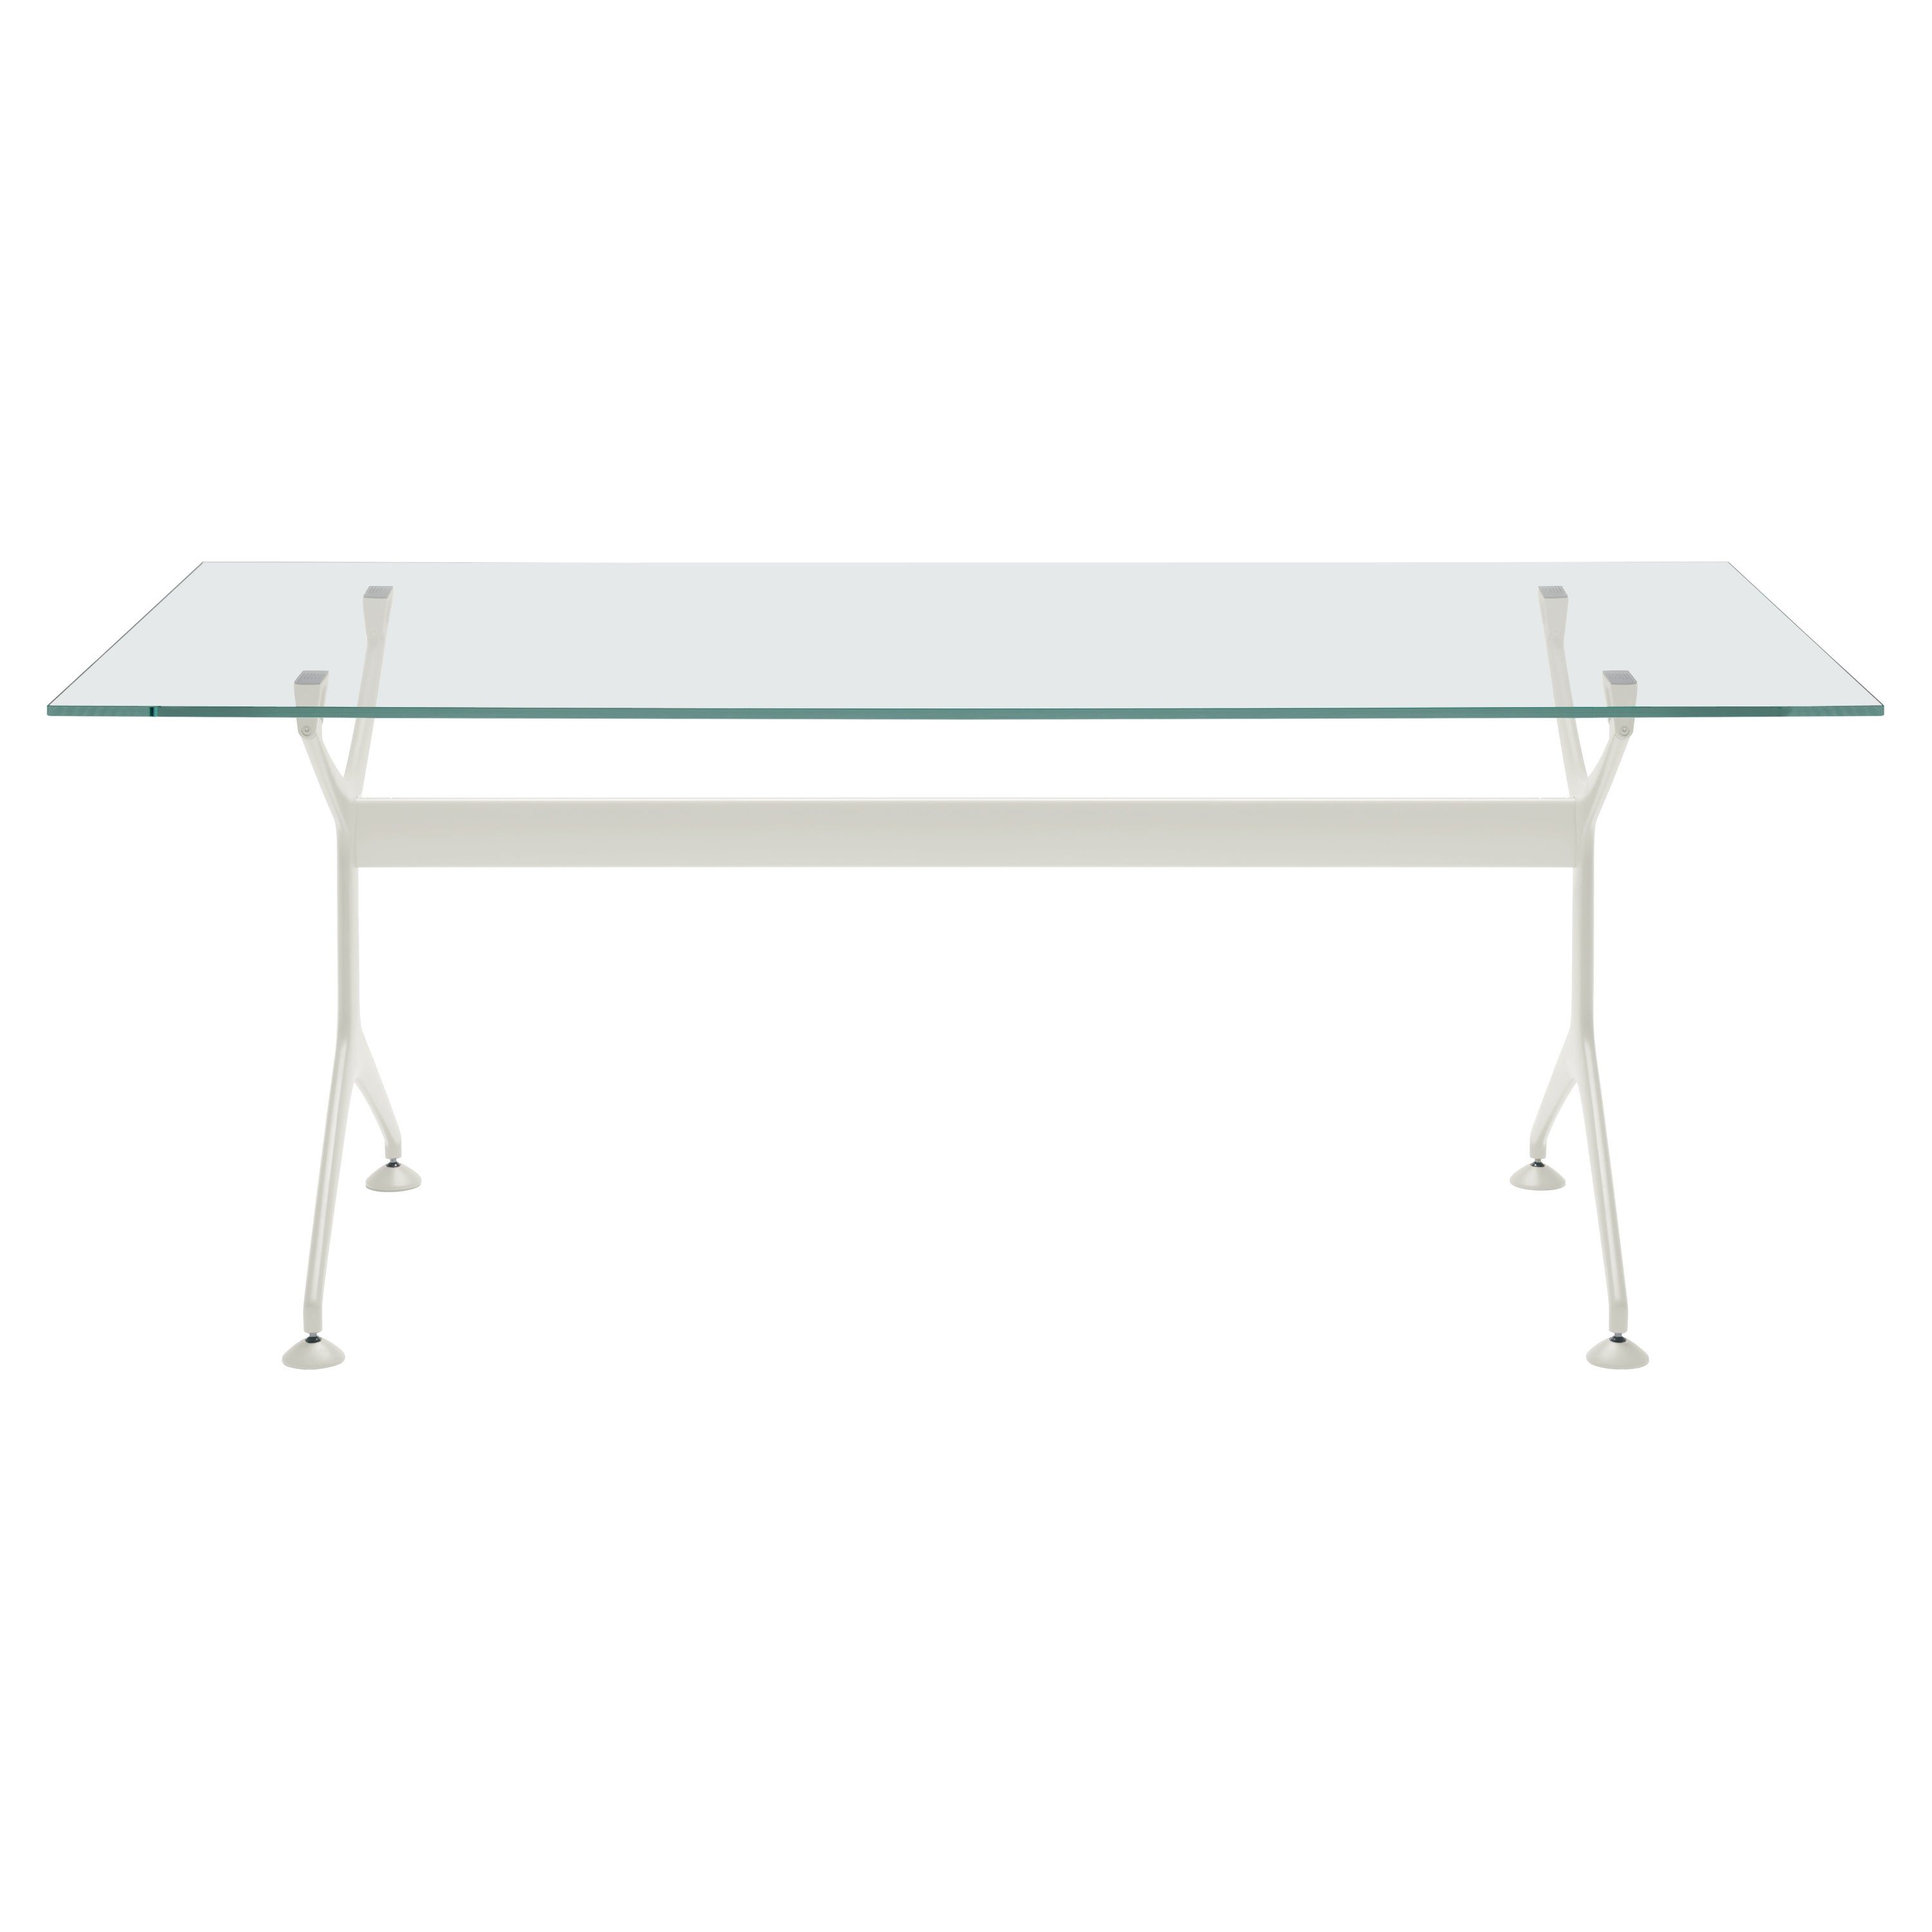 Alias Frametable 160 in Glass Top with White Lacquered Aluminium Frame For Sale